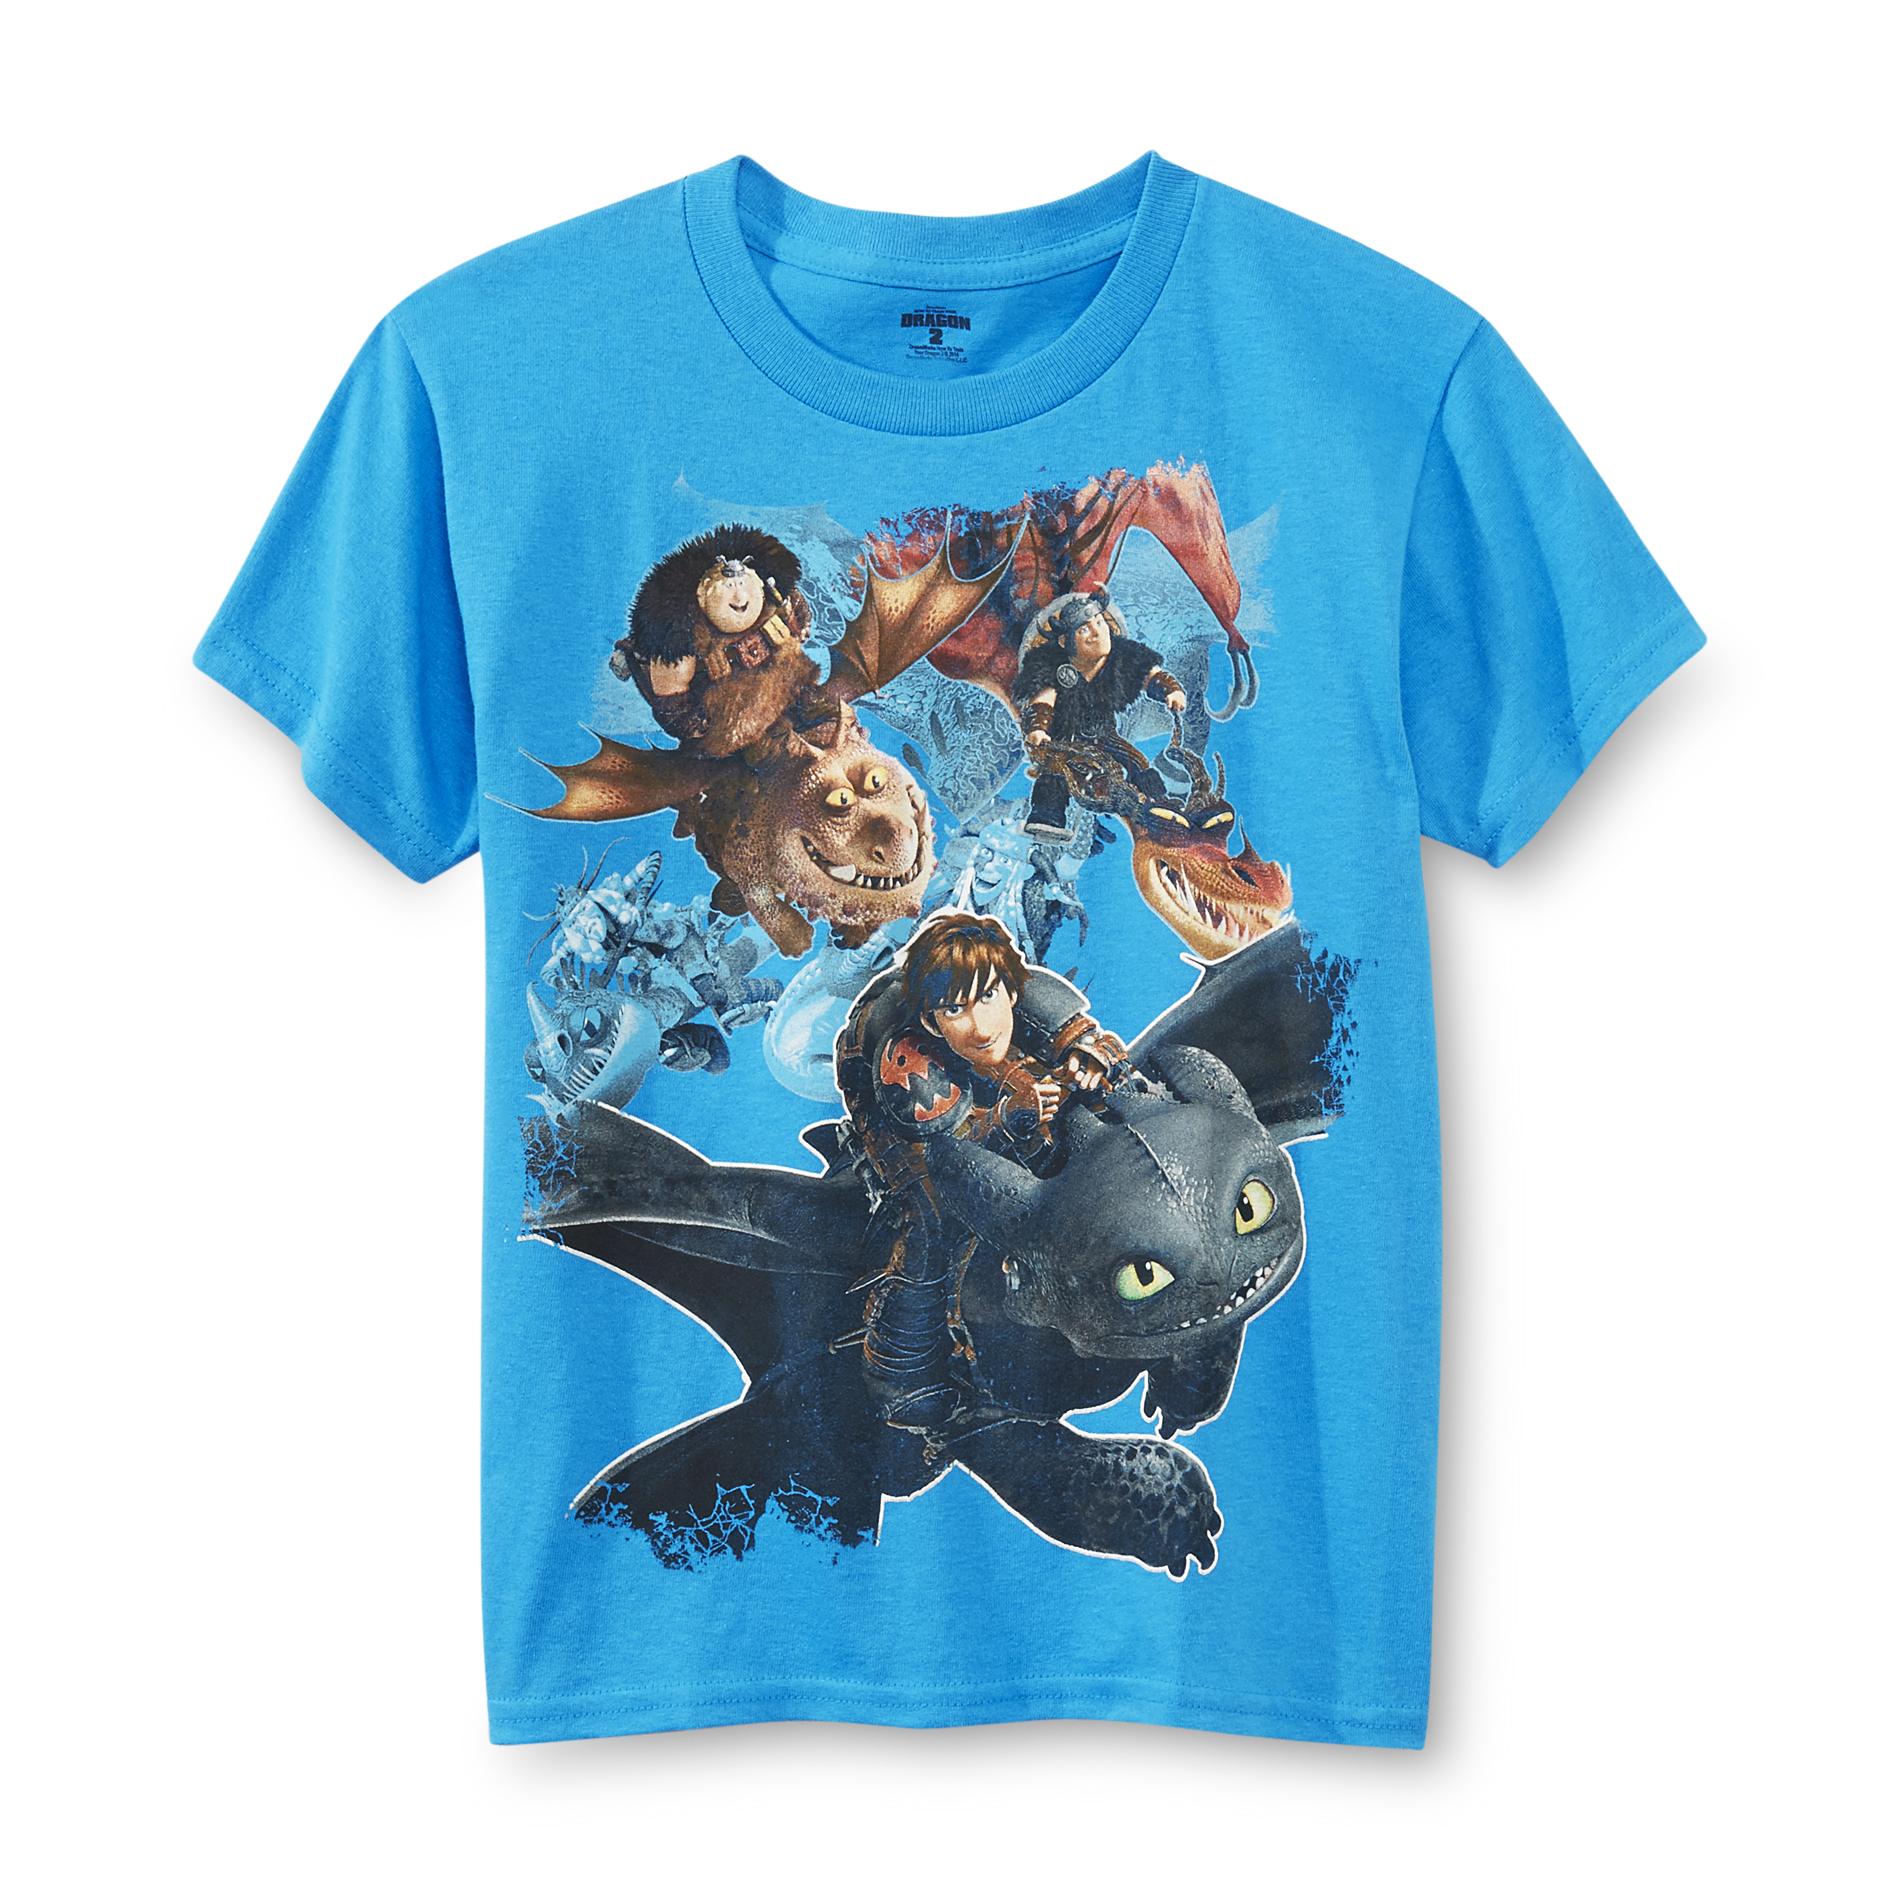 Dreamworks Boy's Graphic T-Shirt - How To Train Your Dragon 2